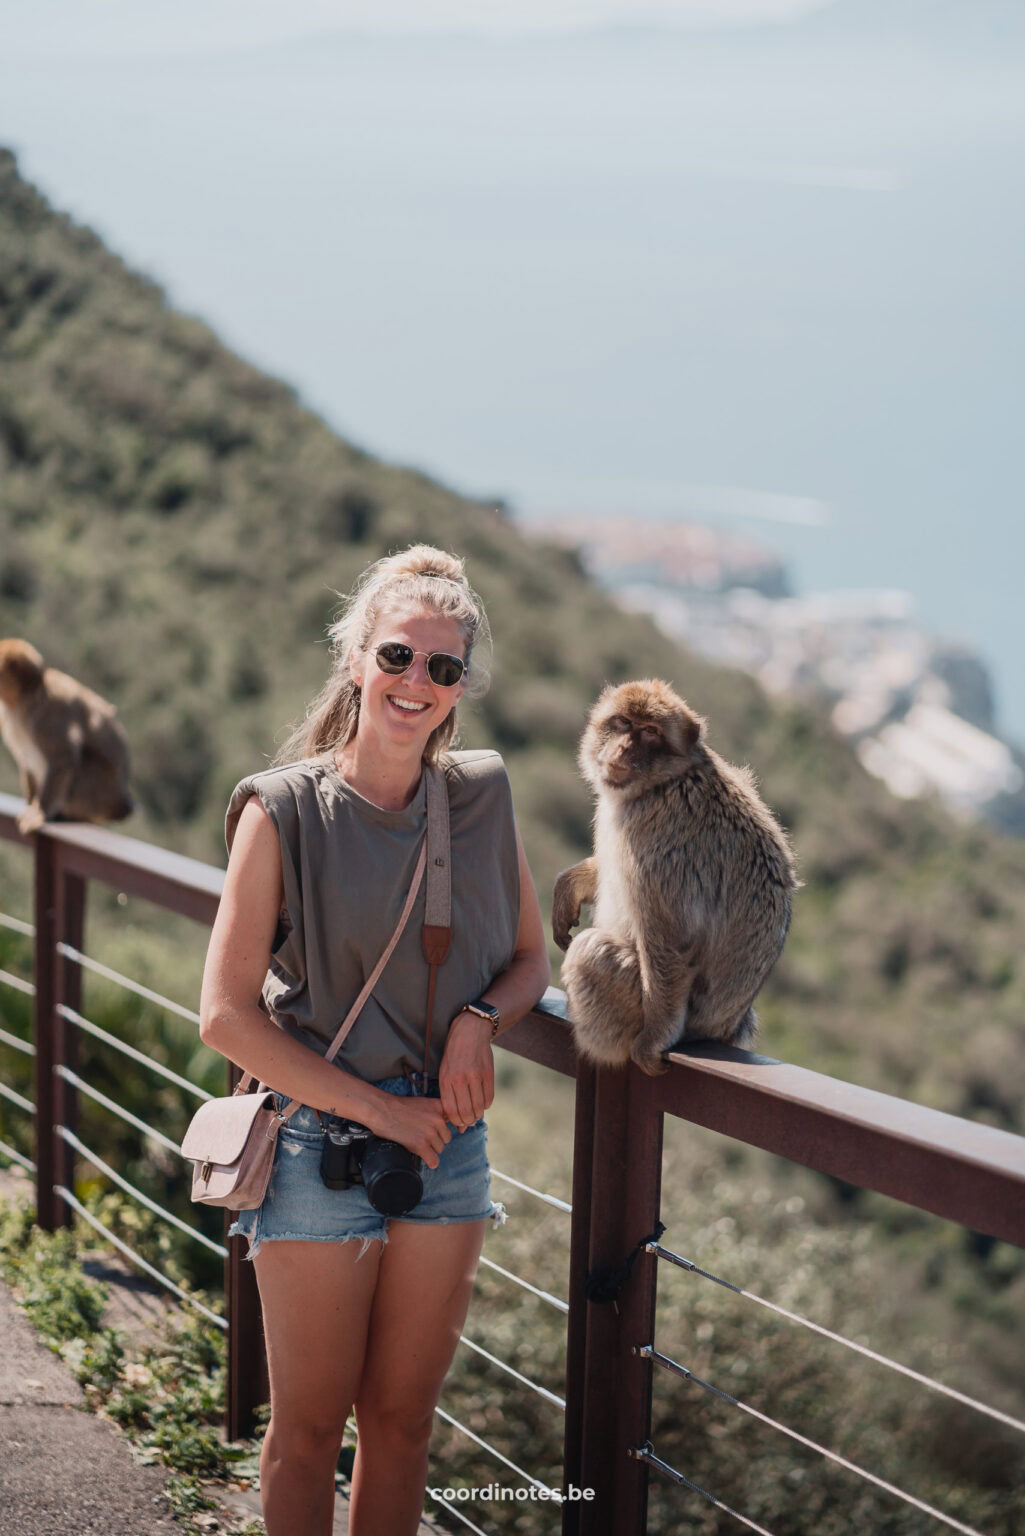 Sarah with a monkey in Gibraltar